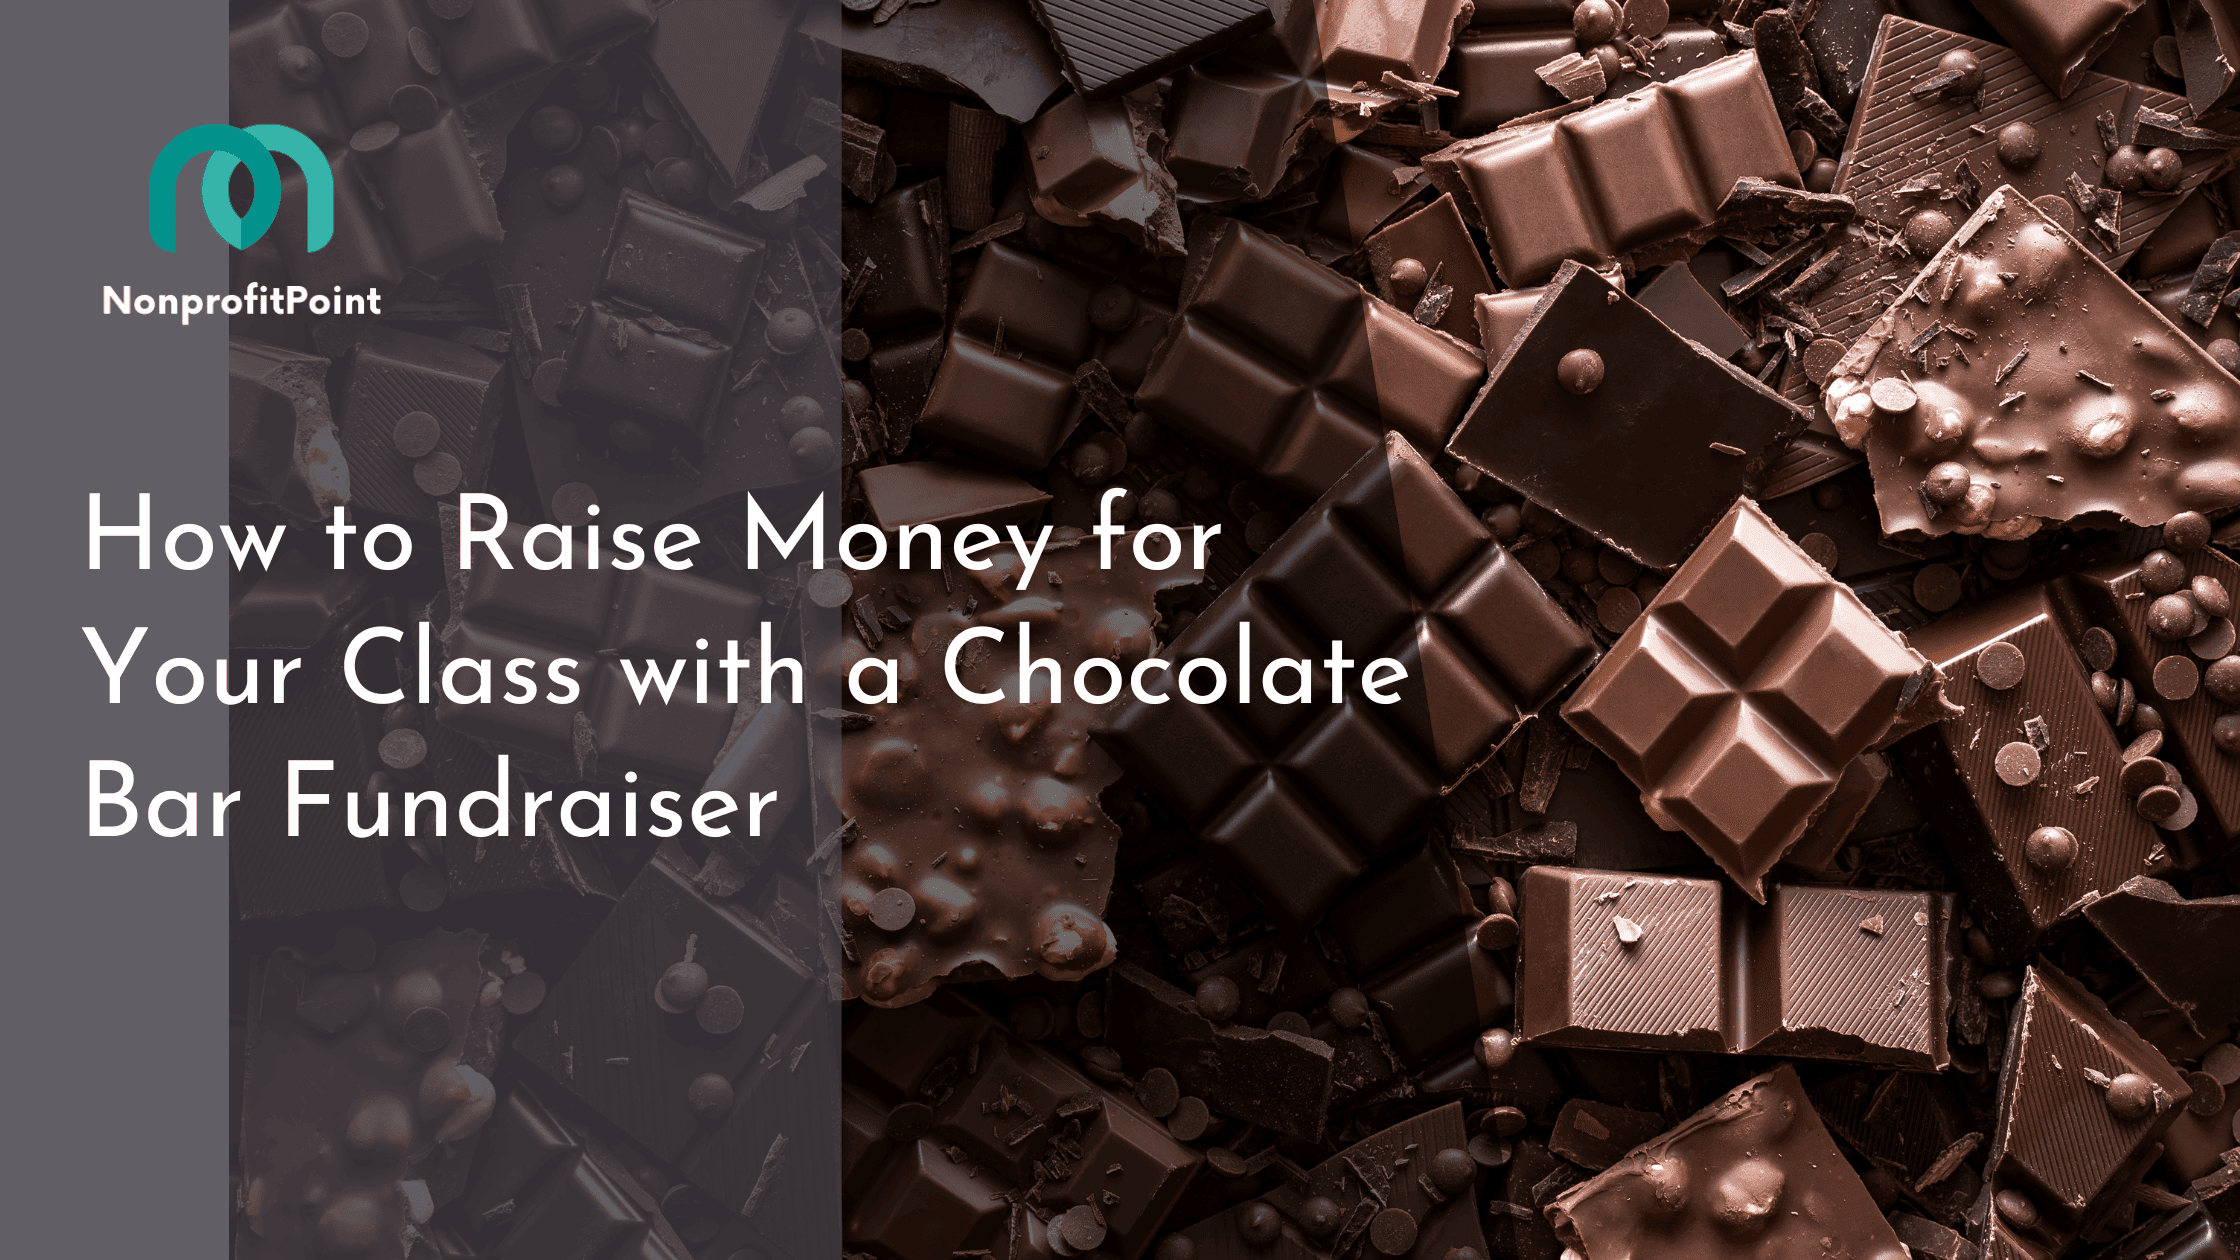 How to Raise Money for Your Class with a Chocolate Bar Fundraiser